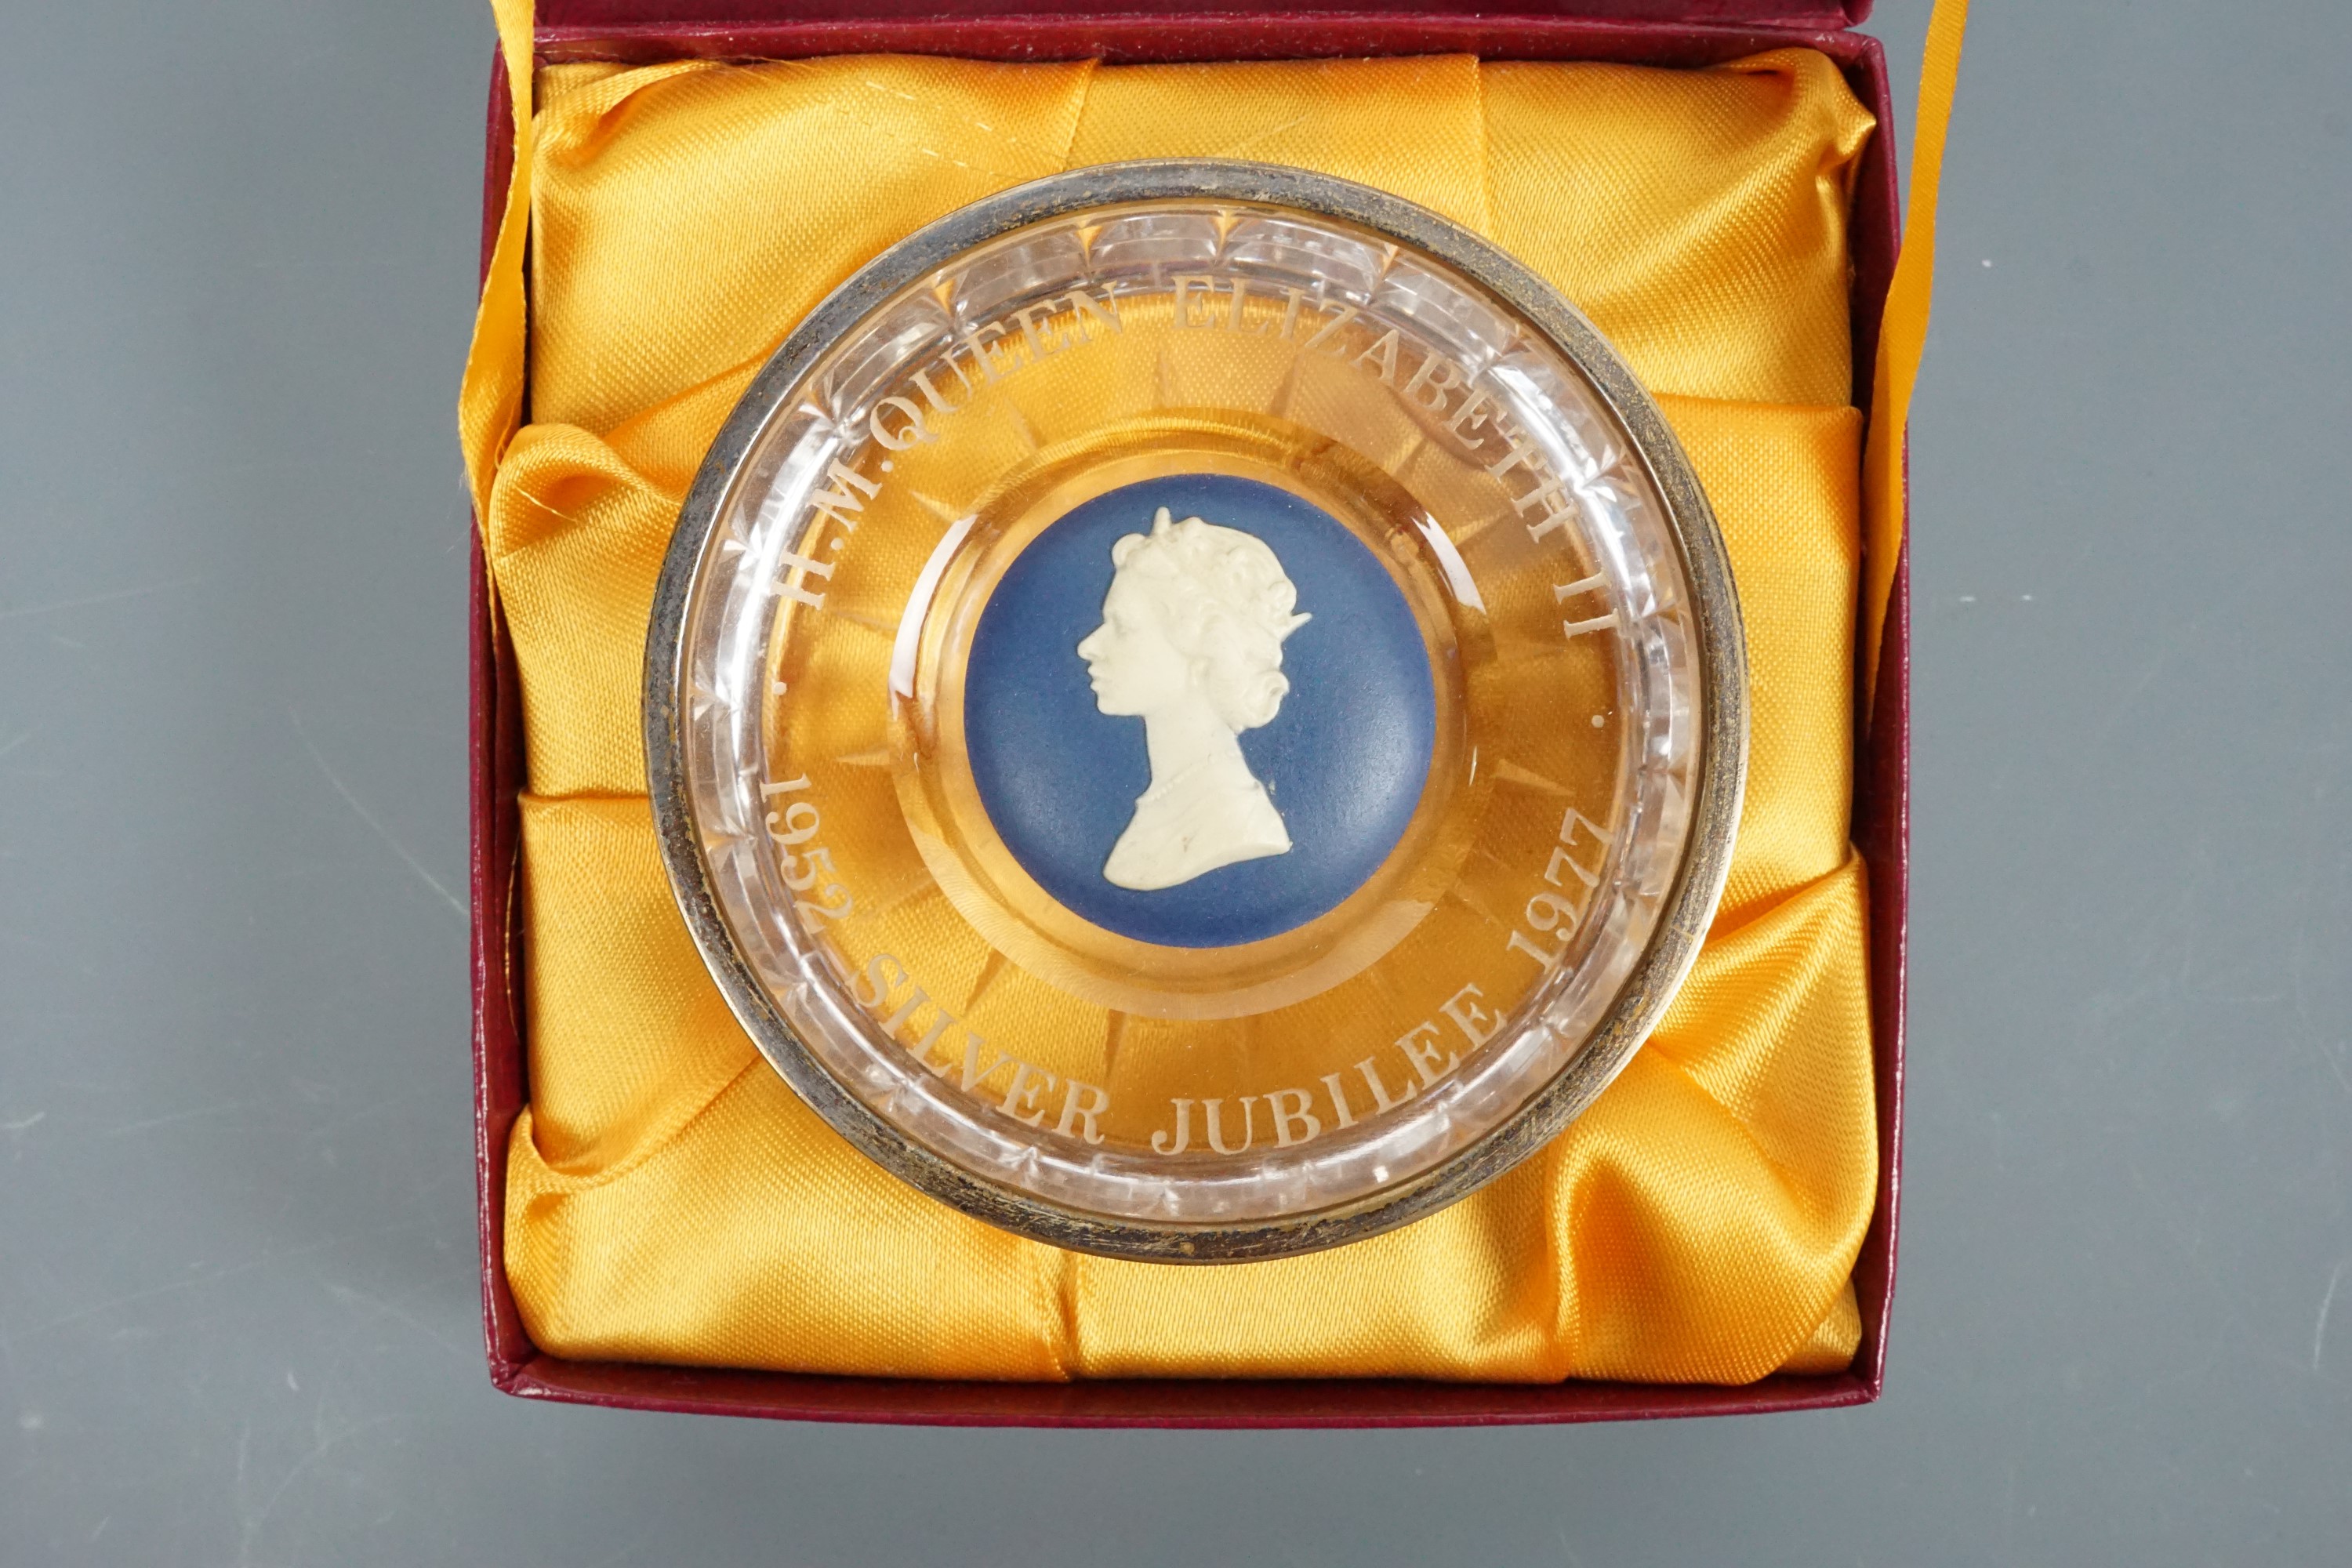 A Wedgwood Queen Elizabeth II Silver Jubilee silver-collared glass paperweight, cased - Image 2 of 2